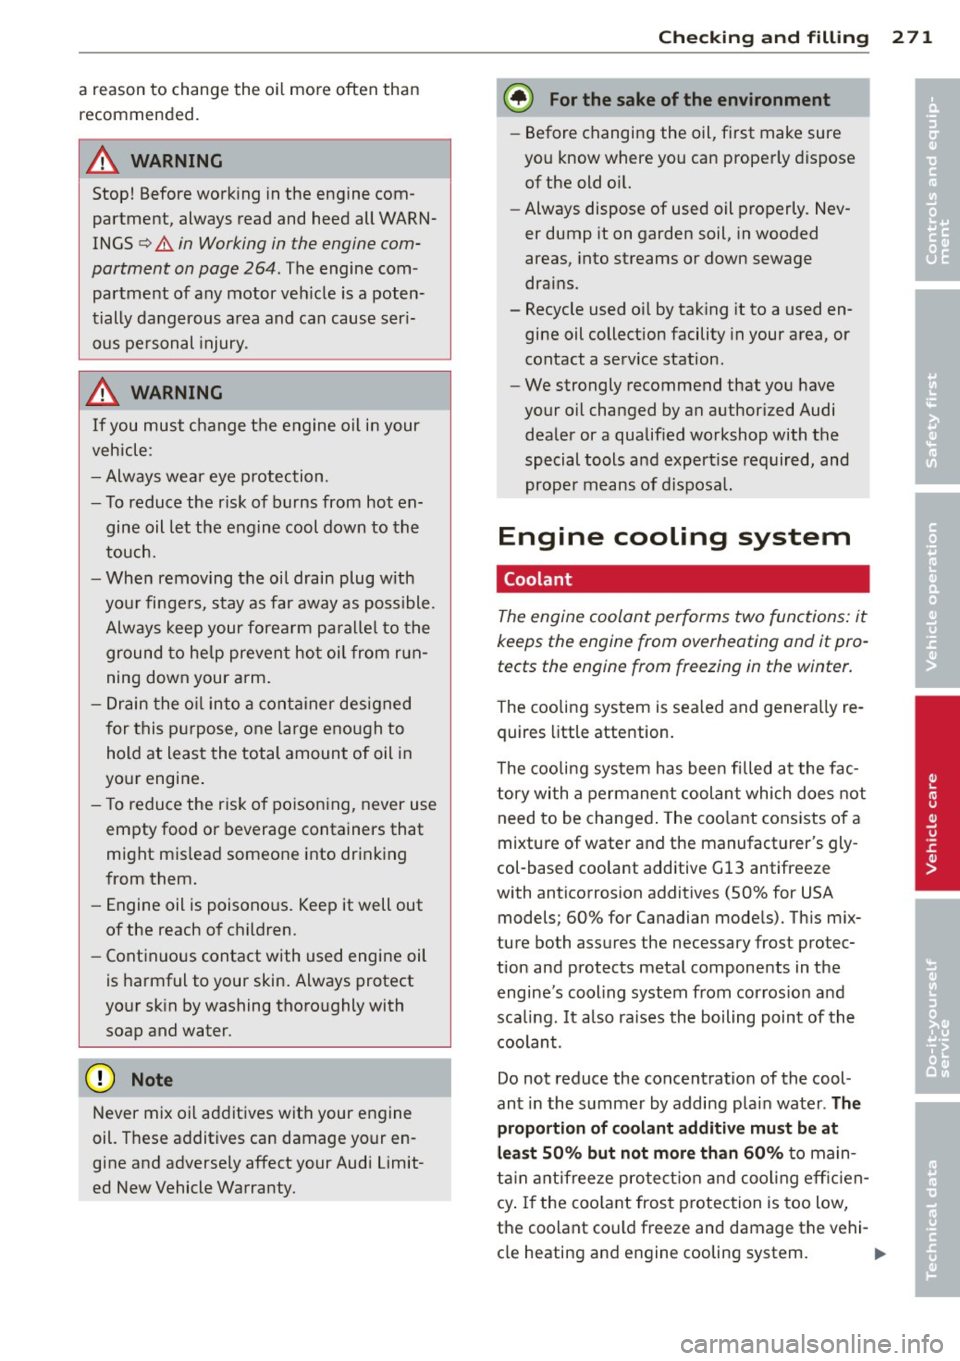 AUDI Q7 2013  Owner´s Manual a reason to  change the  oil  more  often  than recommended. 
A WARNING 
Stop!  Before working  in the  engine  com­
partme nt,  always read and heed all  WARN­
INGS 
q & in Working  in the  engine 